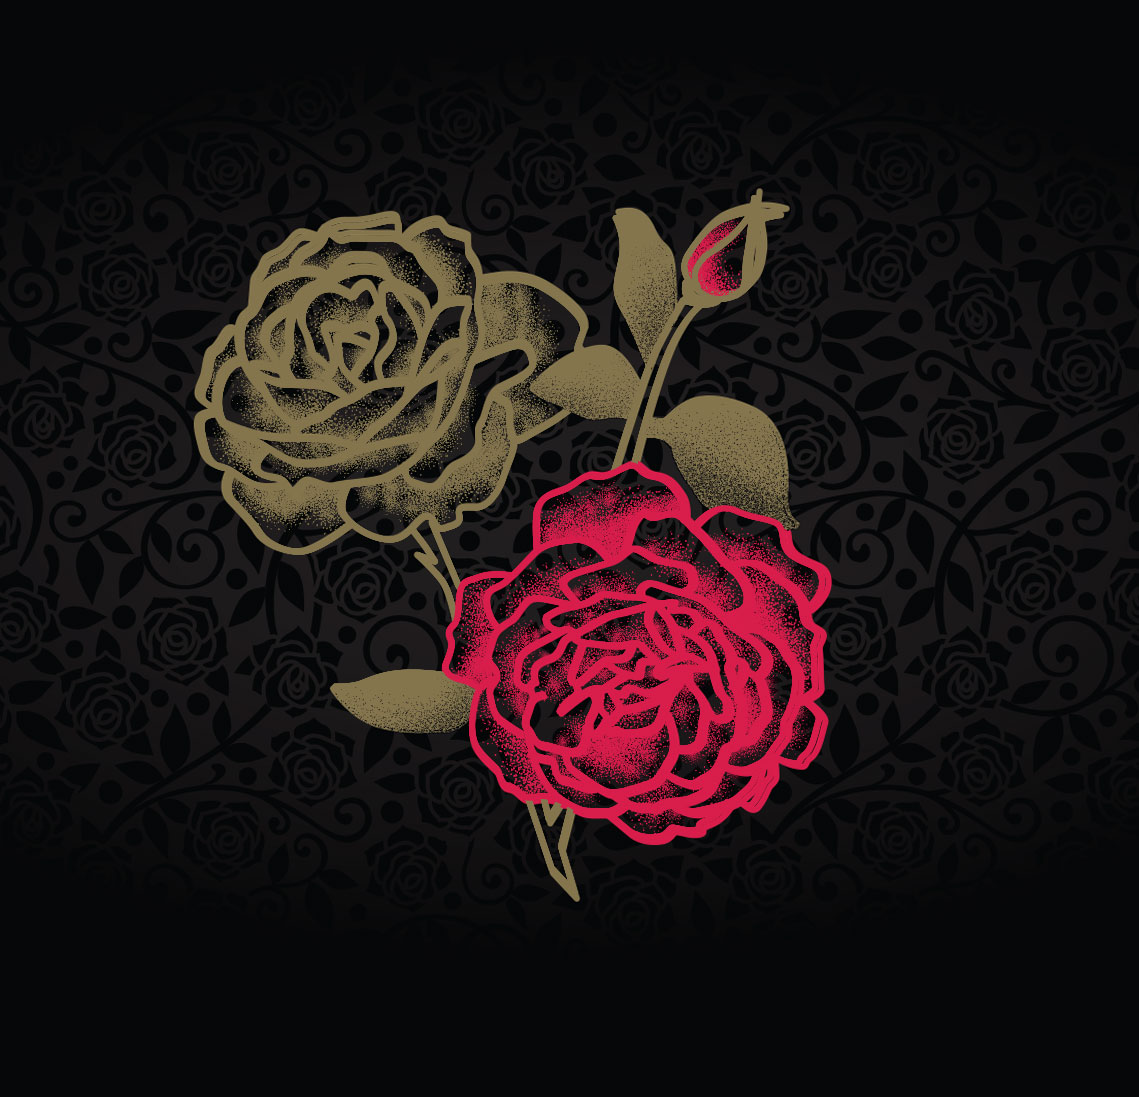 Red and gold roses on a black rose textured background